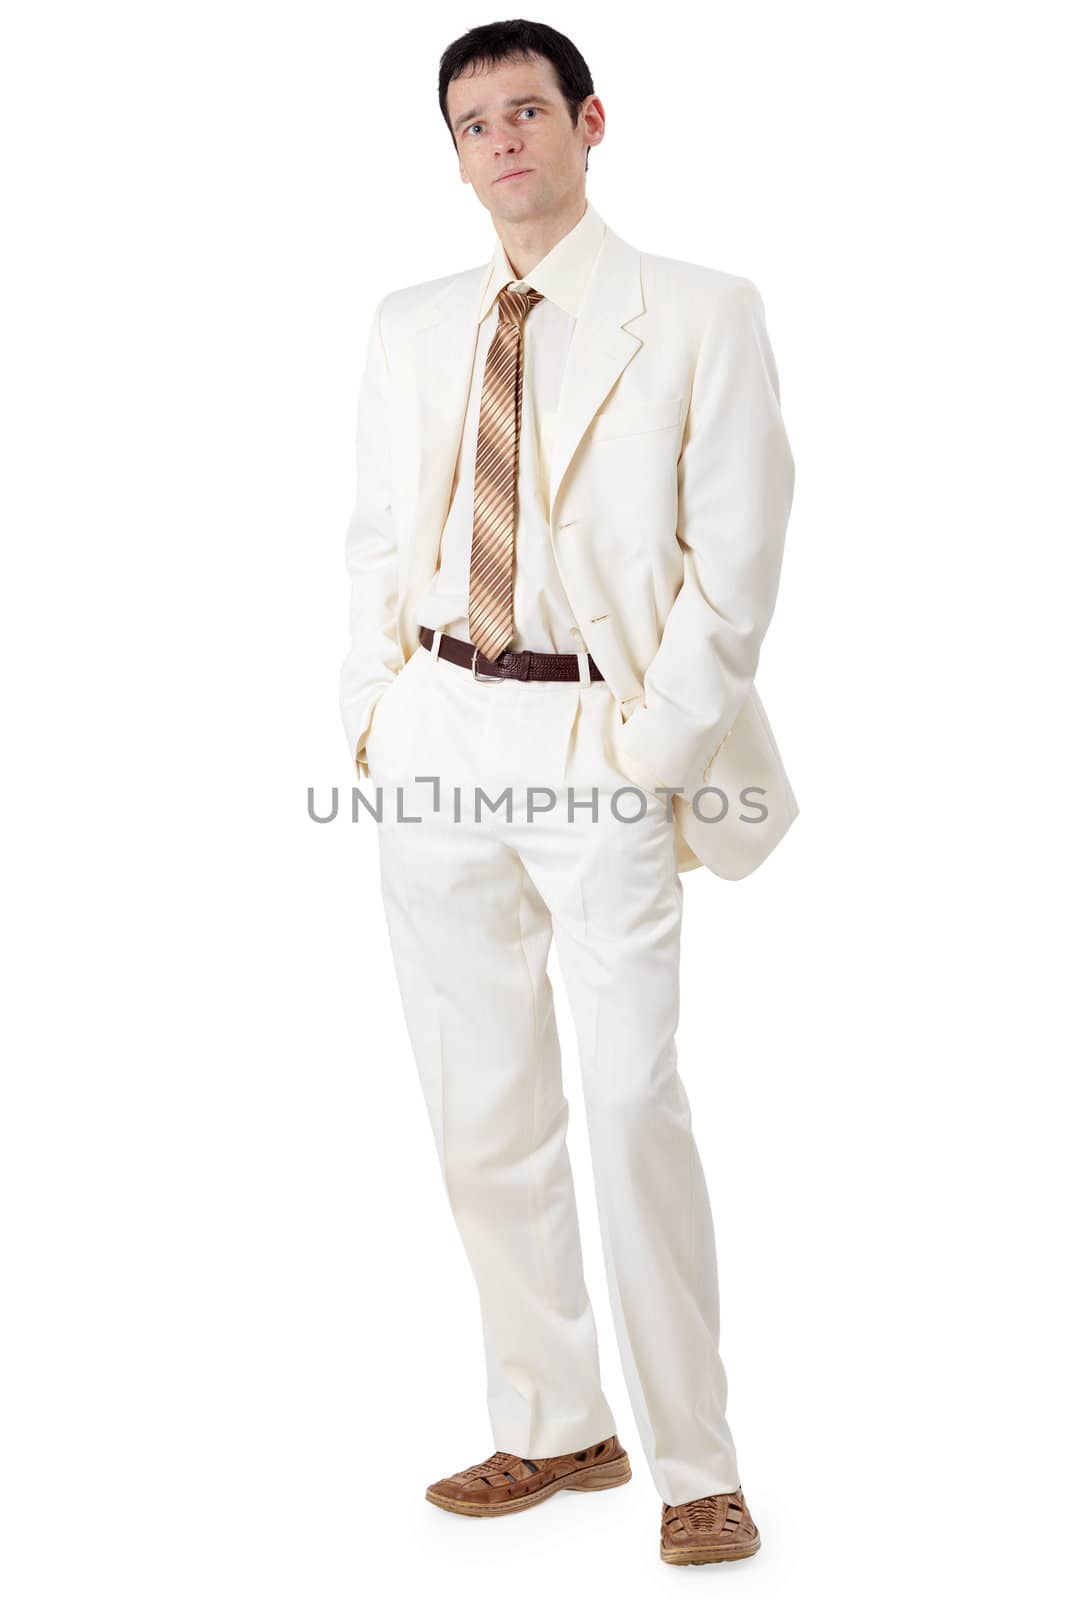 A young handsome businessman in a white suit